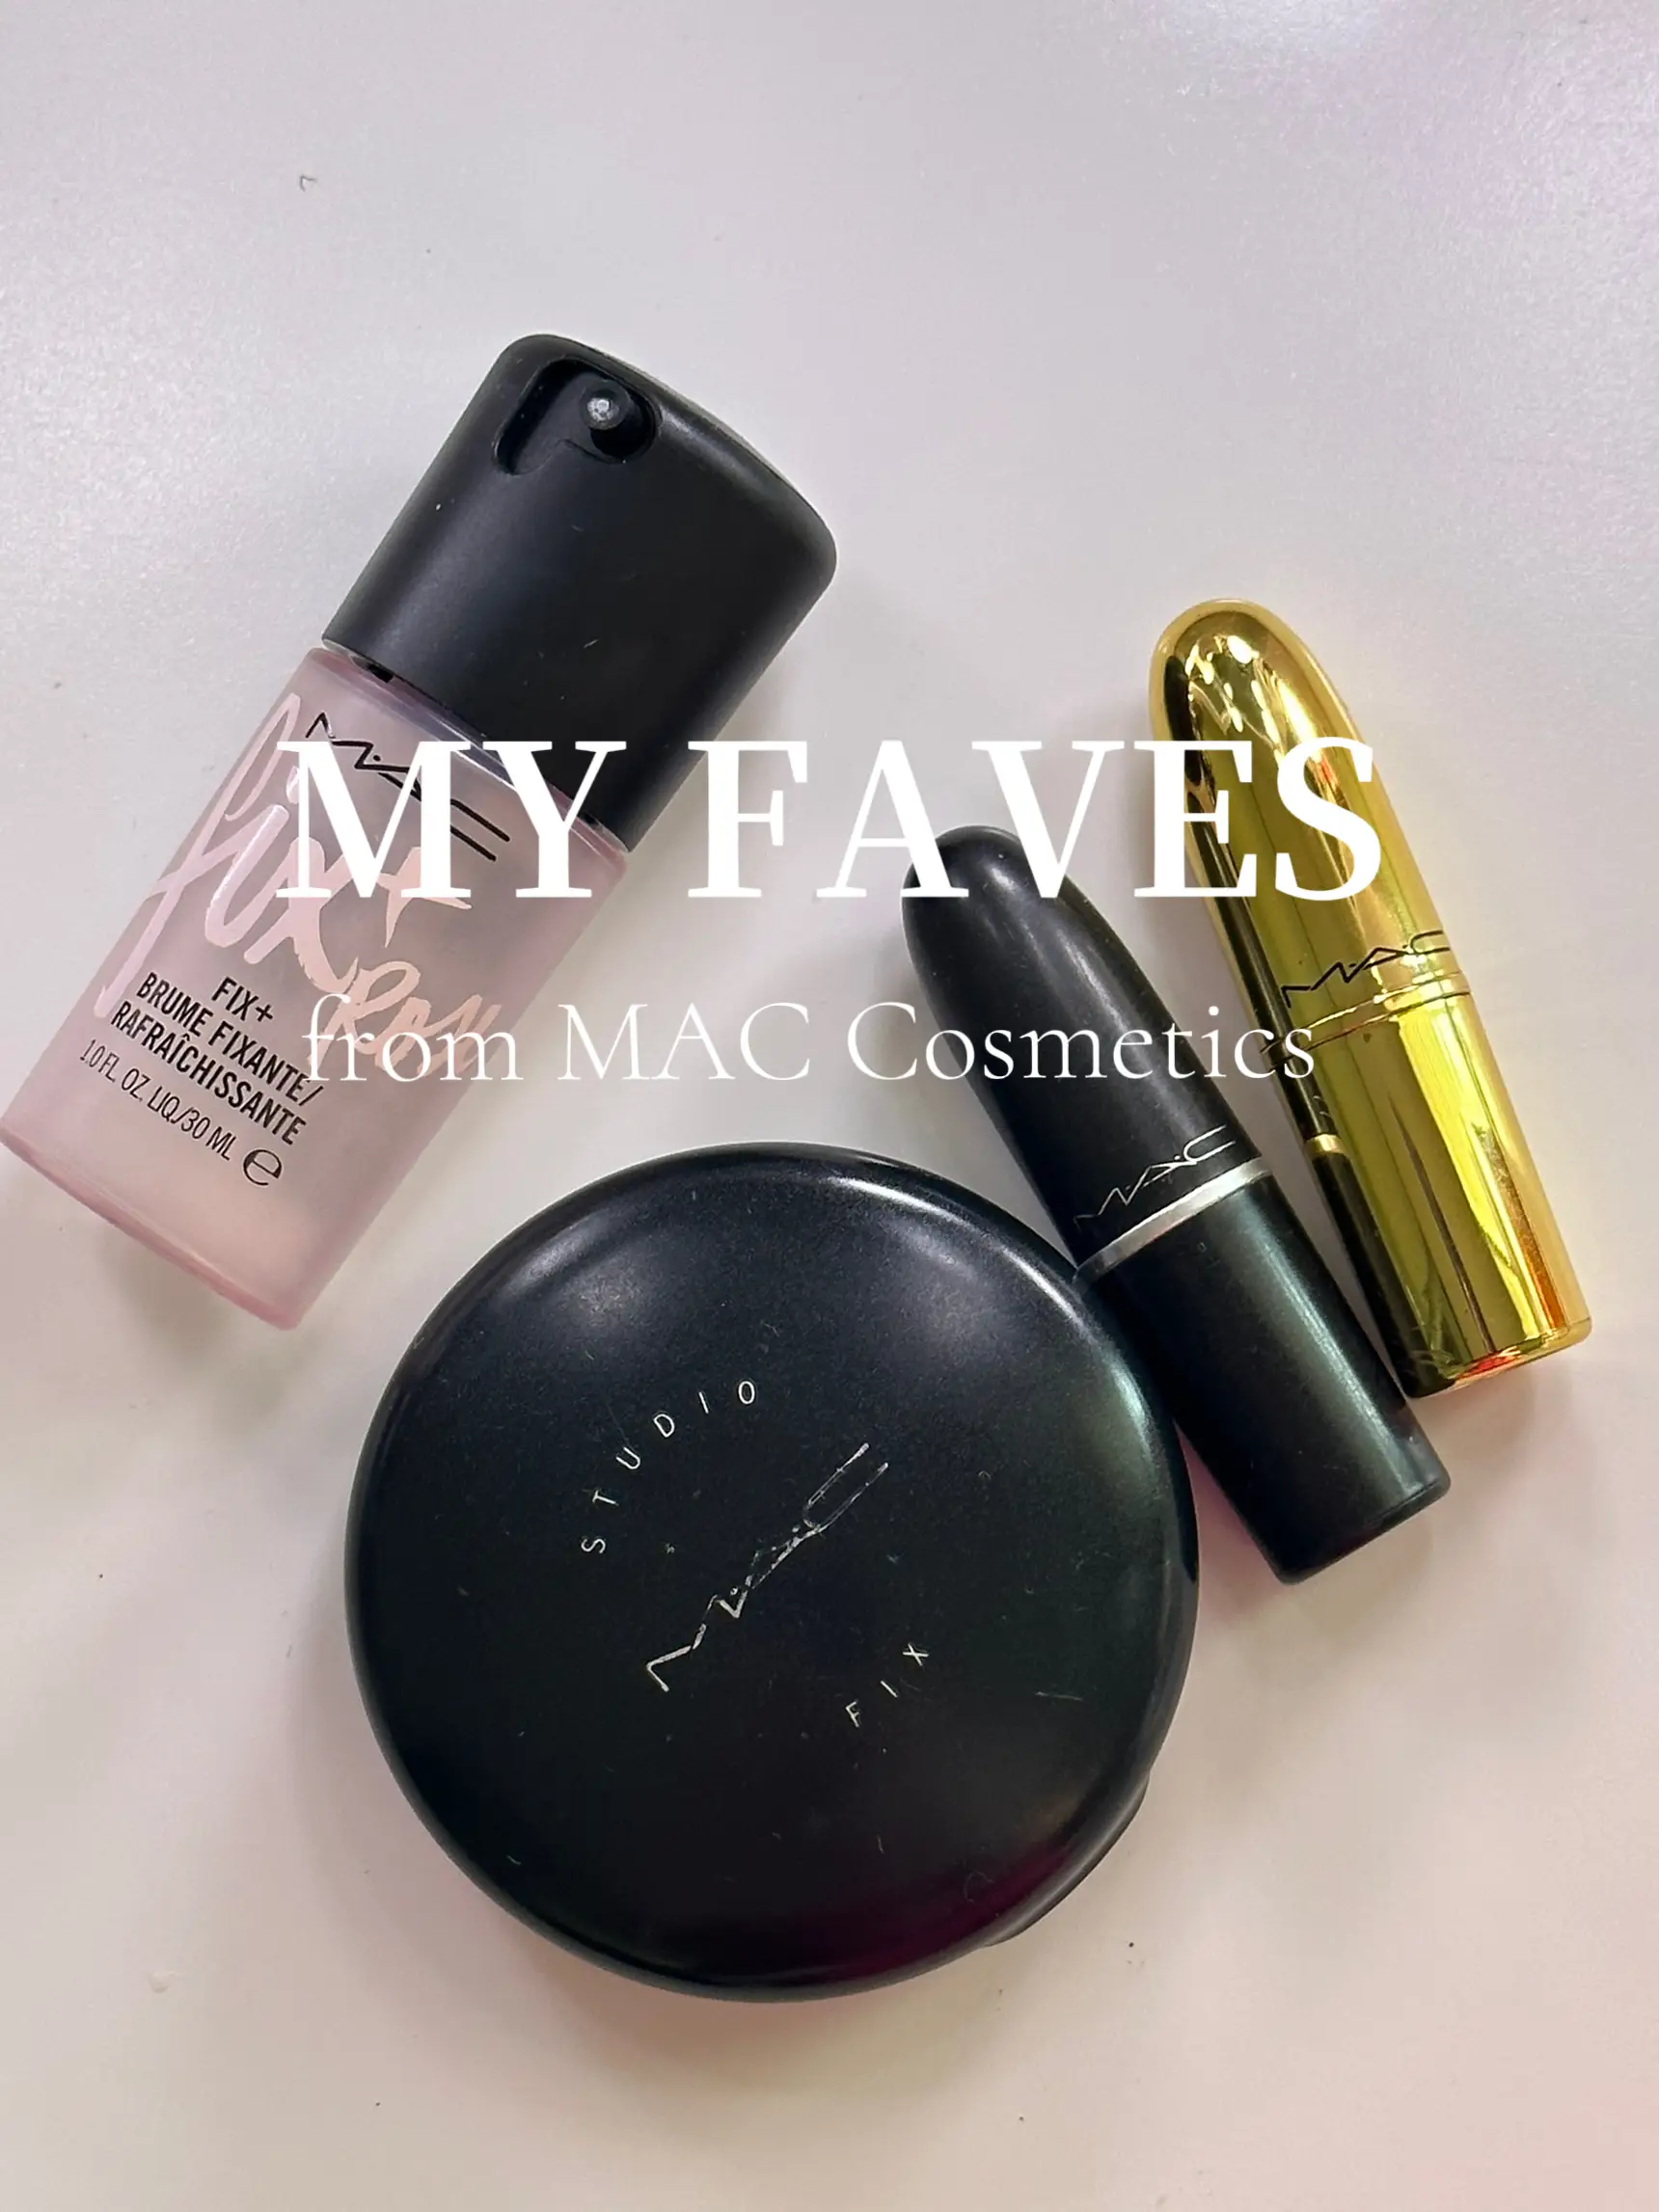 MY FAVES from MAC Cosmetics 's images